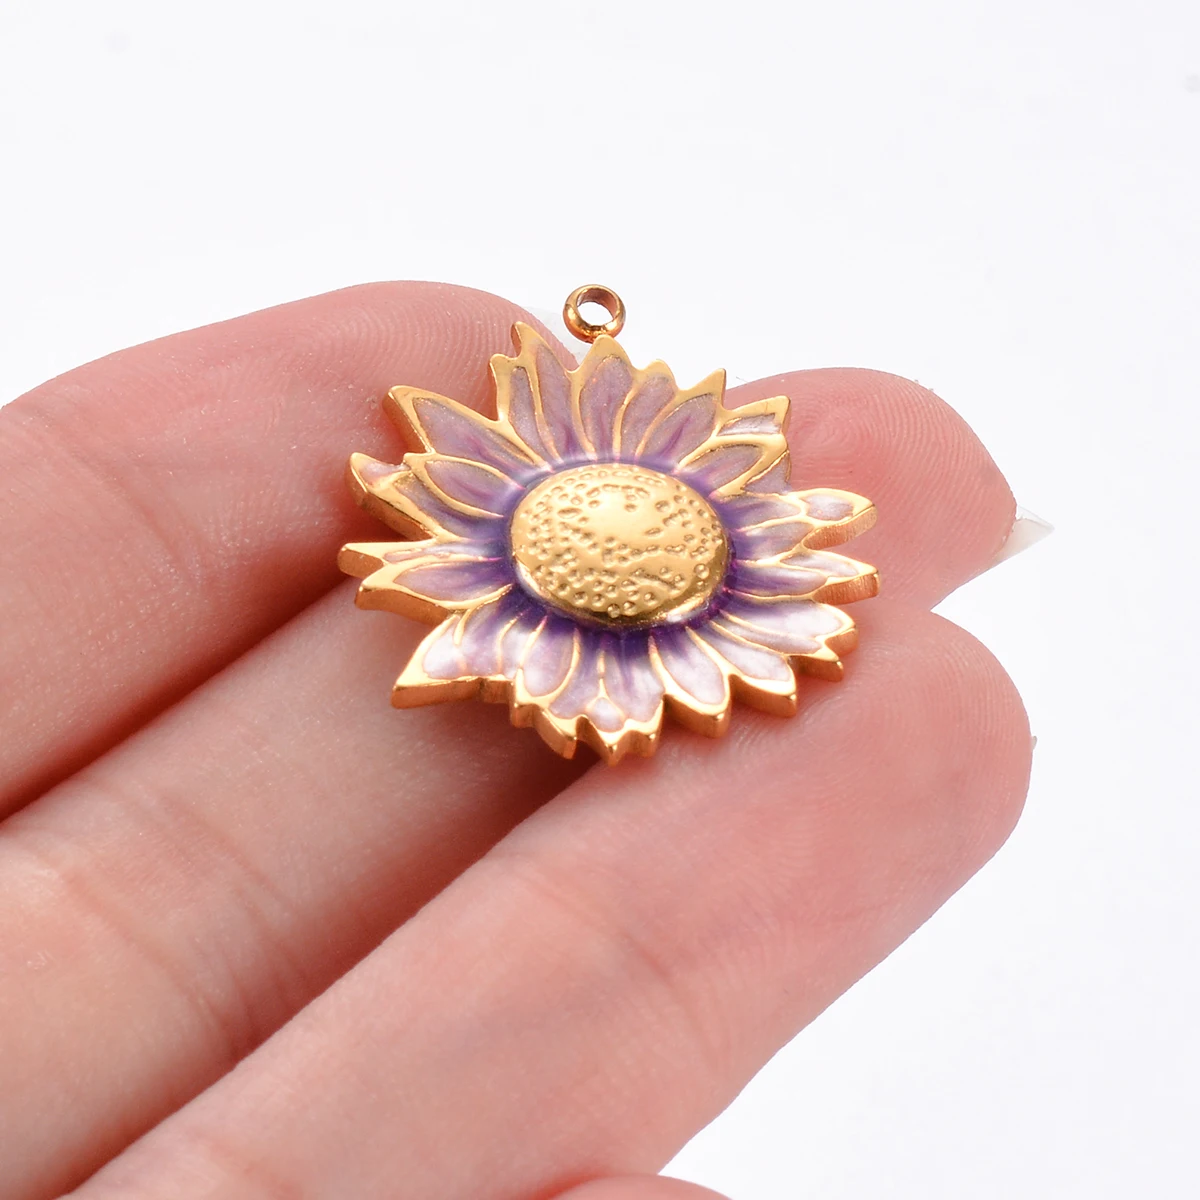 Wholesale 5pcs/lot Stainless Steel Enamel Colorful Sunflower Charms For DIY Necklaces Earrings Jewelry Making Accessories